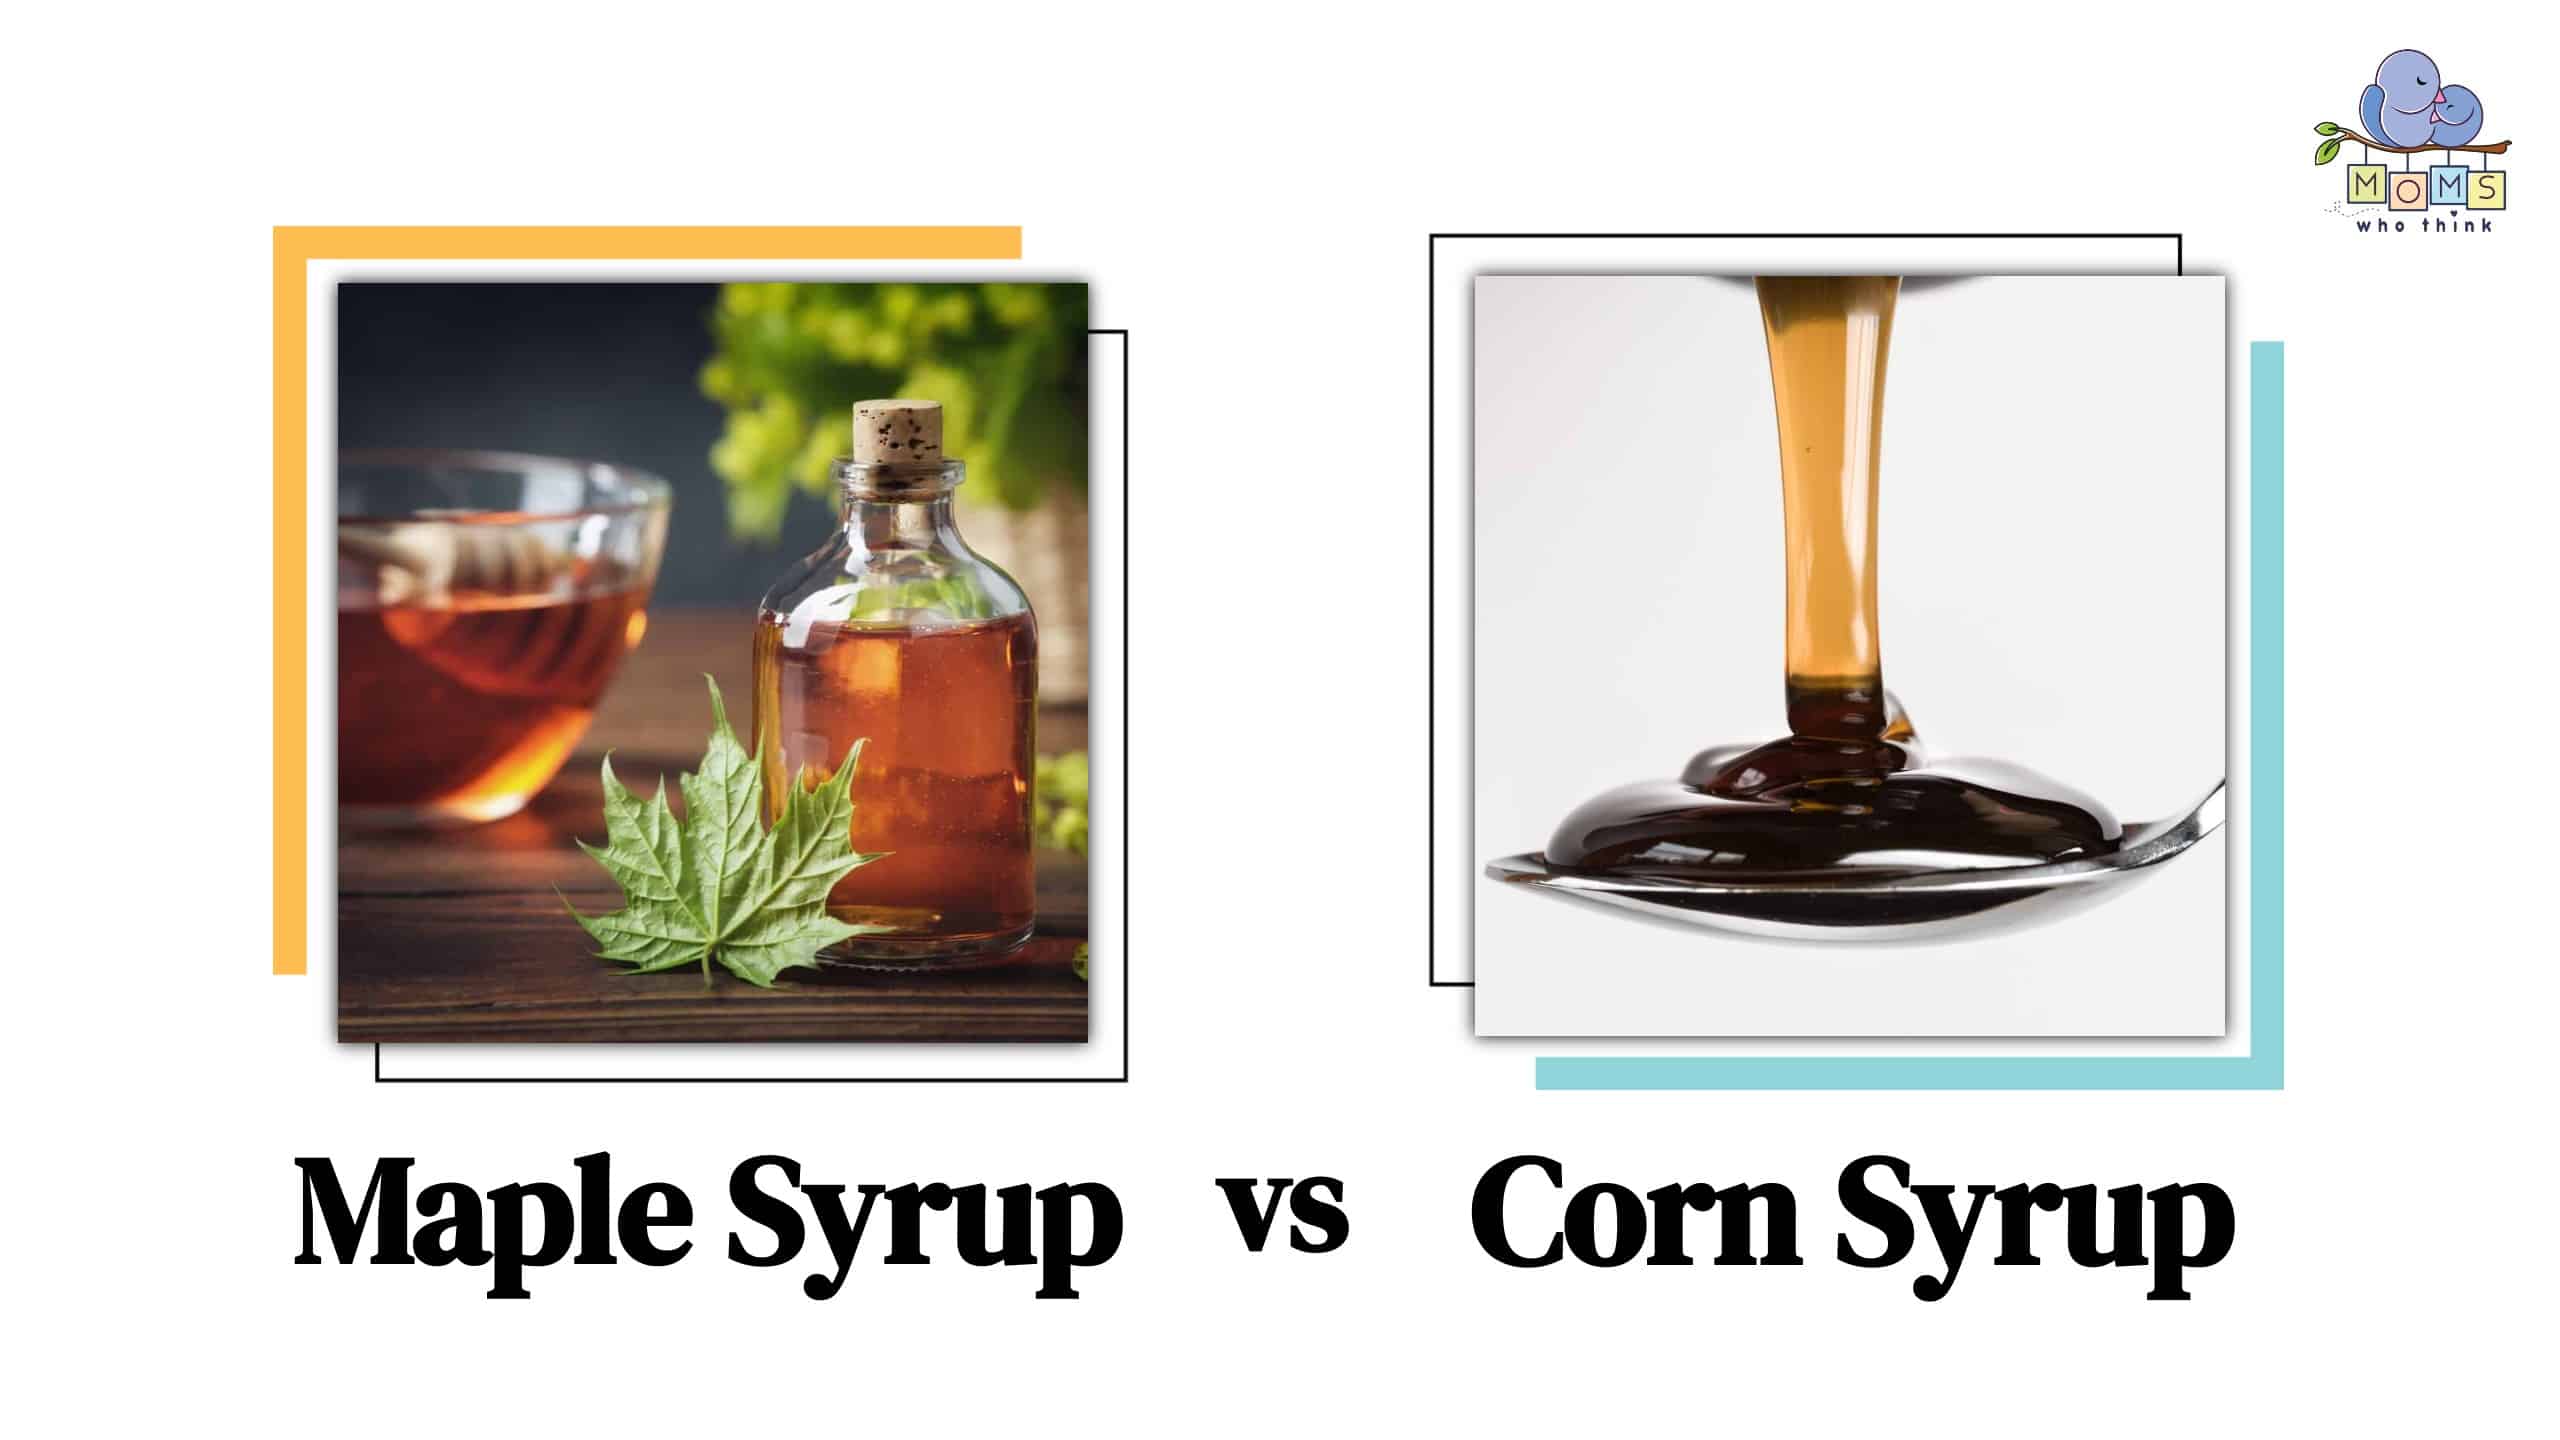 Maple Syrup vs Corn Syrup